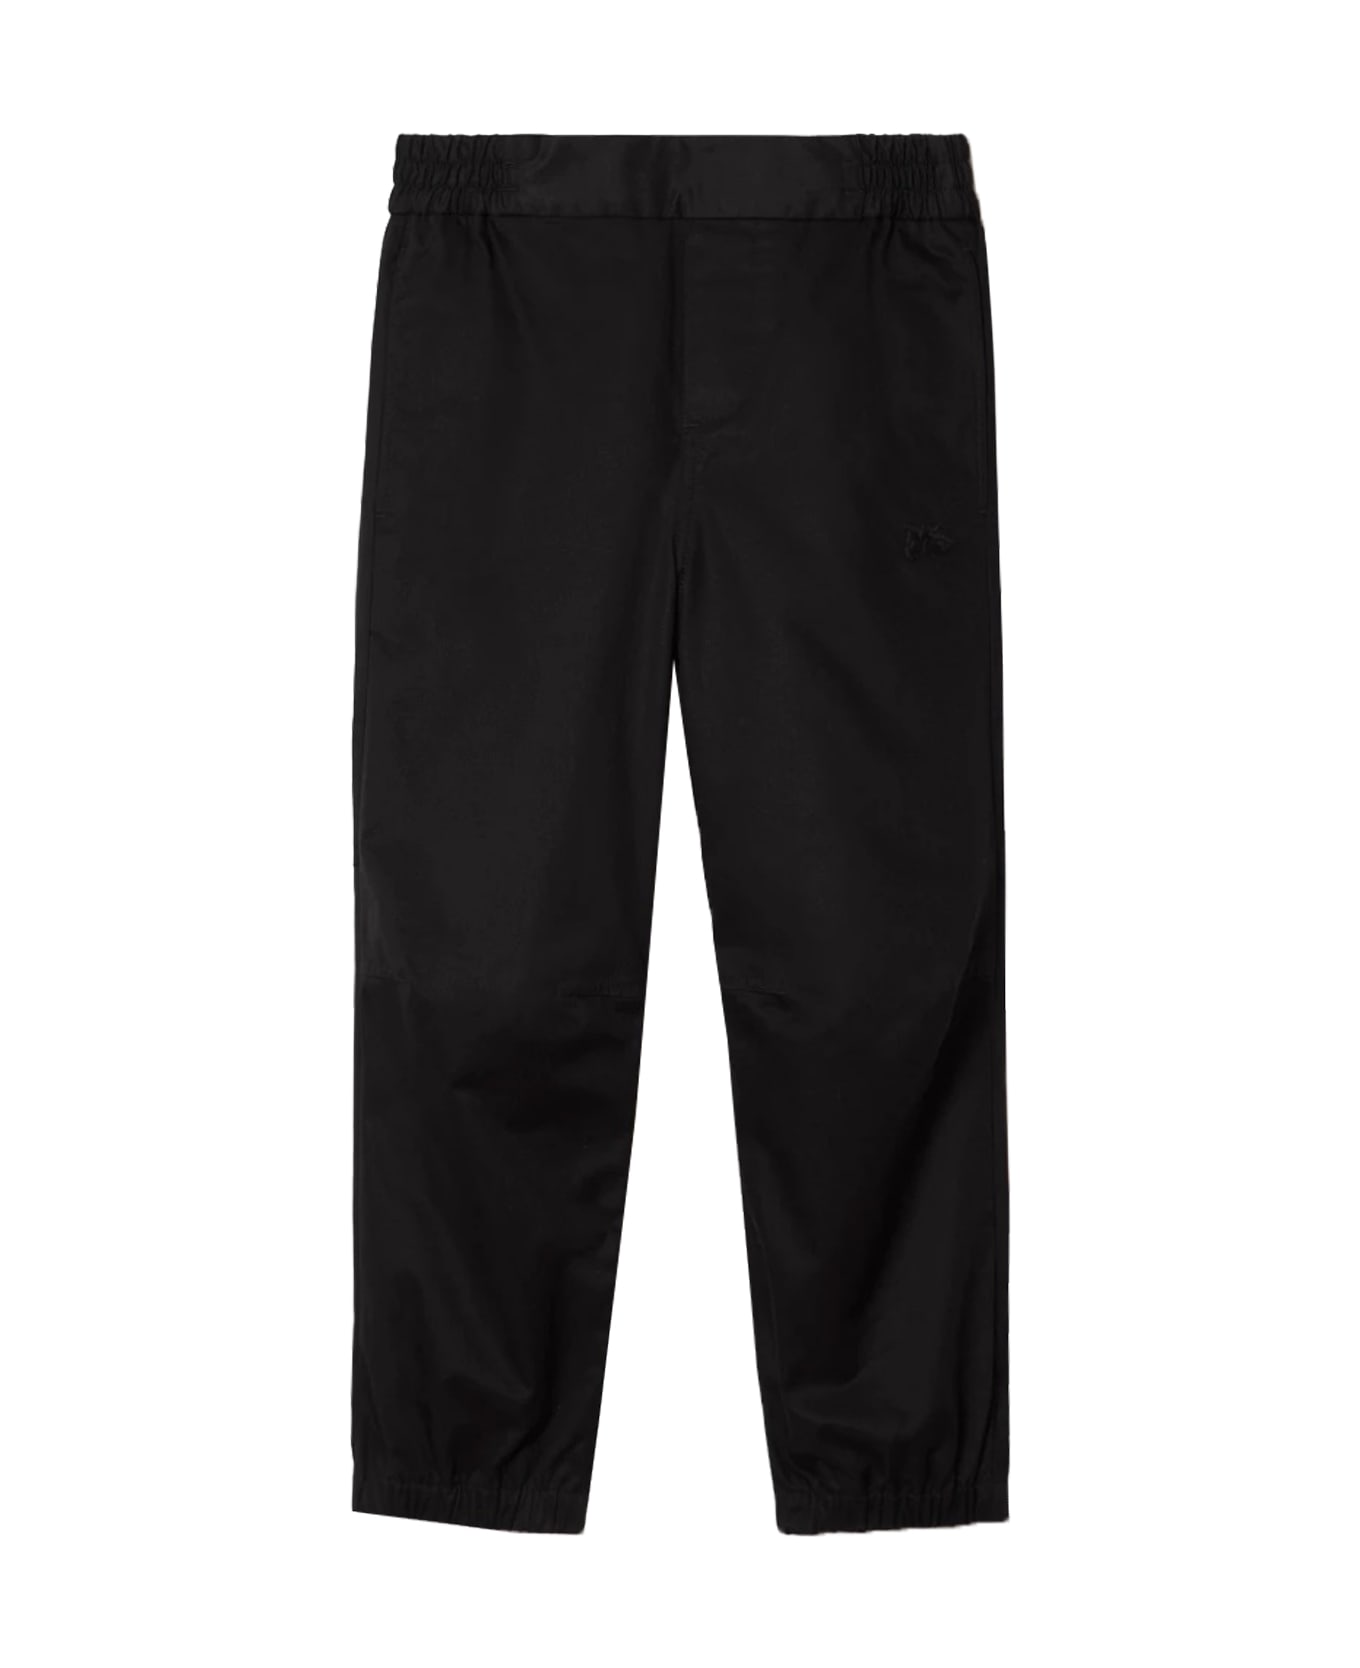 Burberry Cotton Twill Pants - Back ボトムス